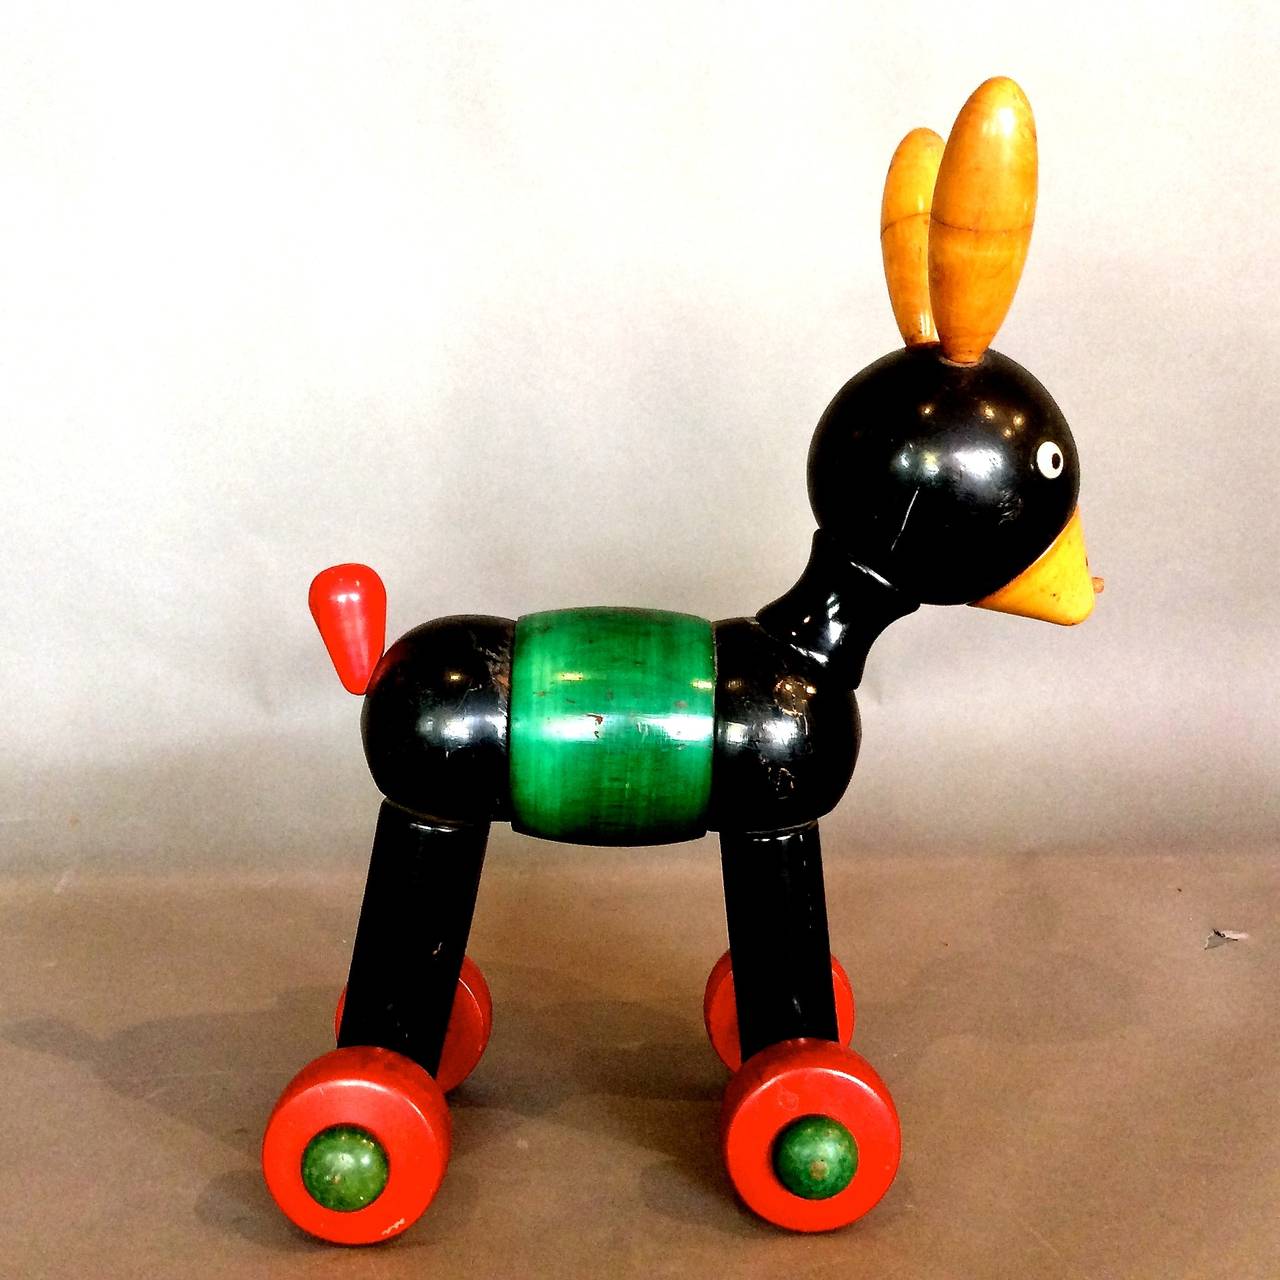 Black lacquered and stained wood articulated pull toy manufactured by the Italian firm Sevi c.1940s in a geometric constructivist style.

WEEKLY DELIVERIES TO MANHATTAN FOR APPROVAL OR SALES. STANDARD DELIVERY FEE IS $150.